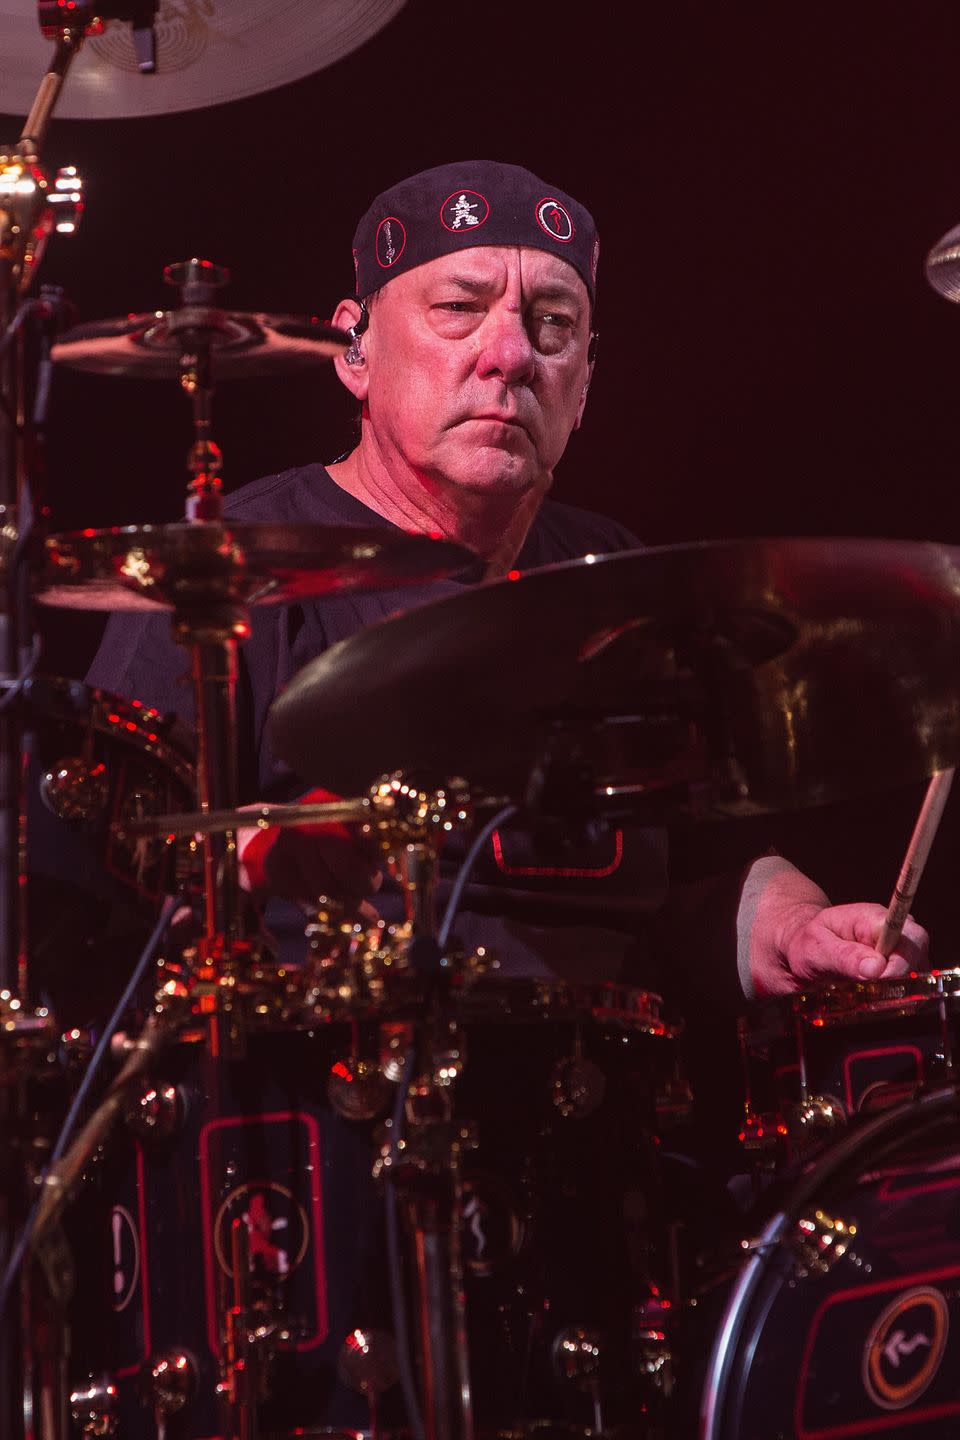 Neil Peart - drummer from rock band Rush - died January 7